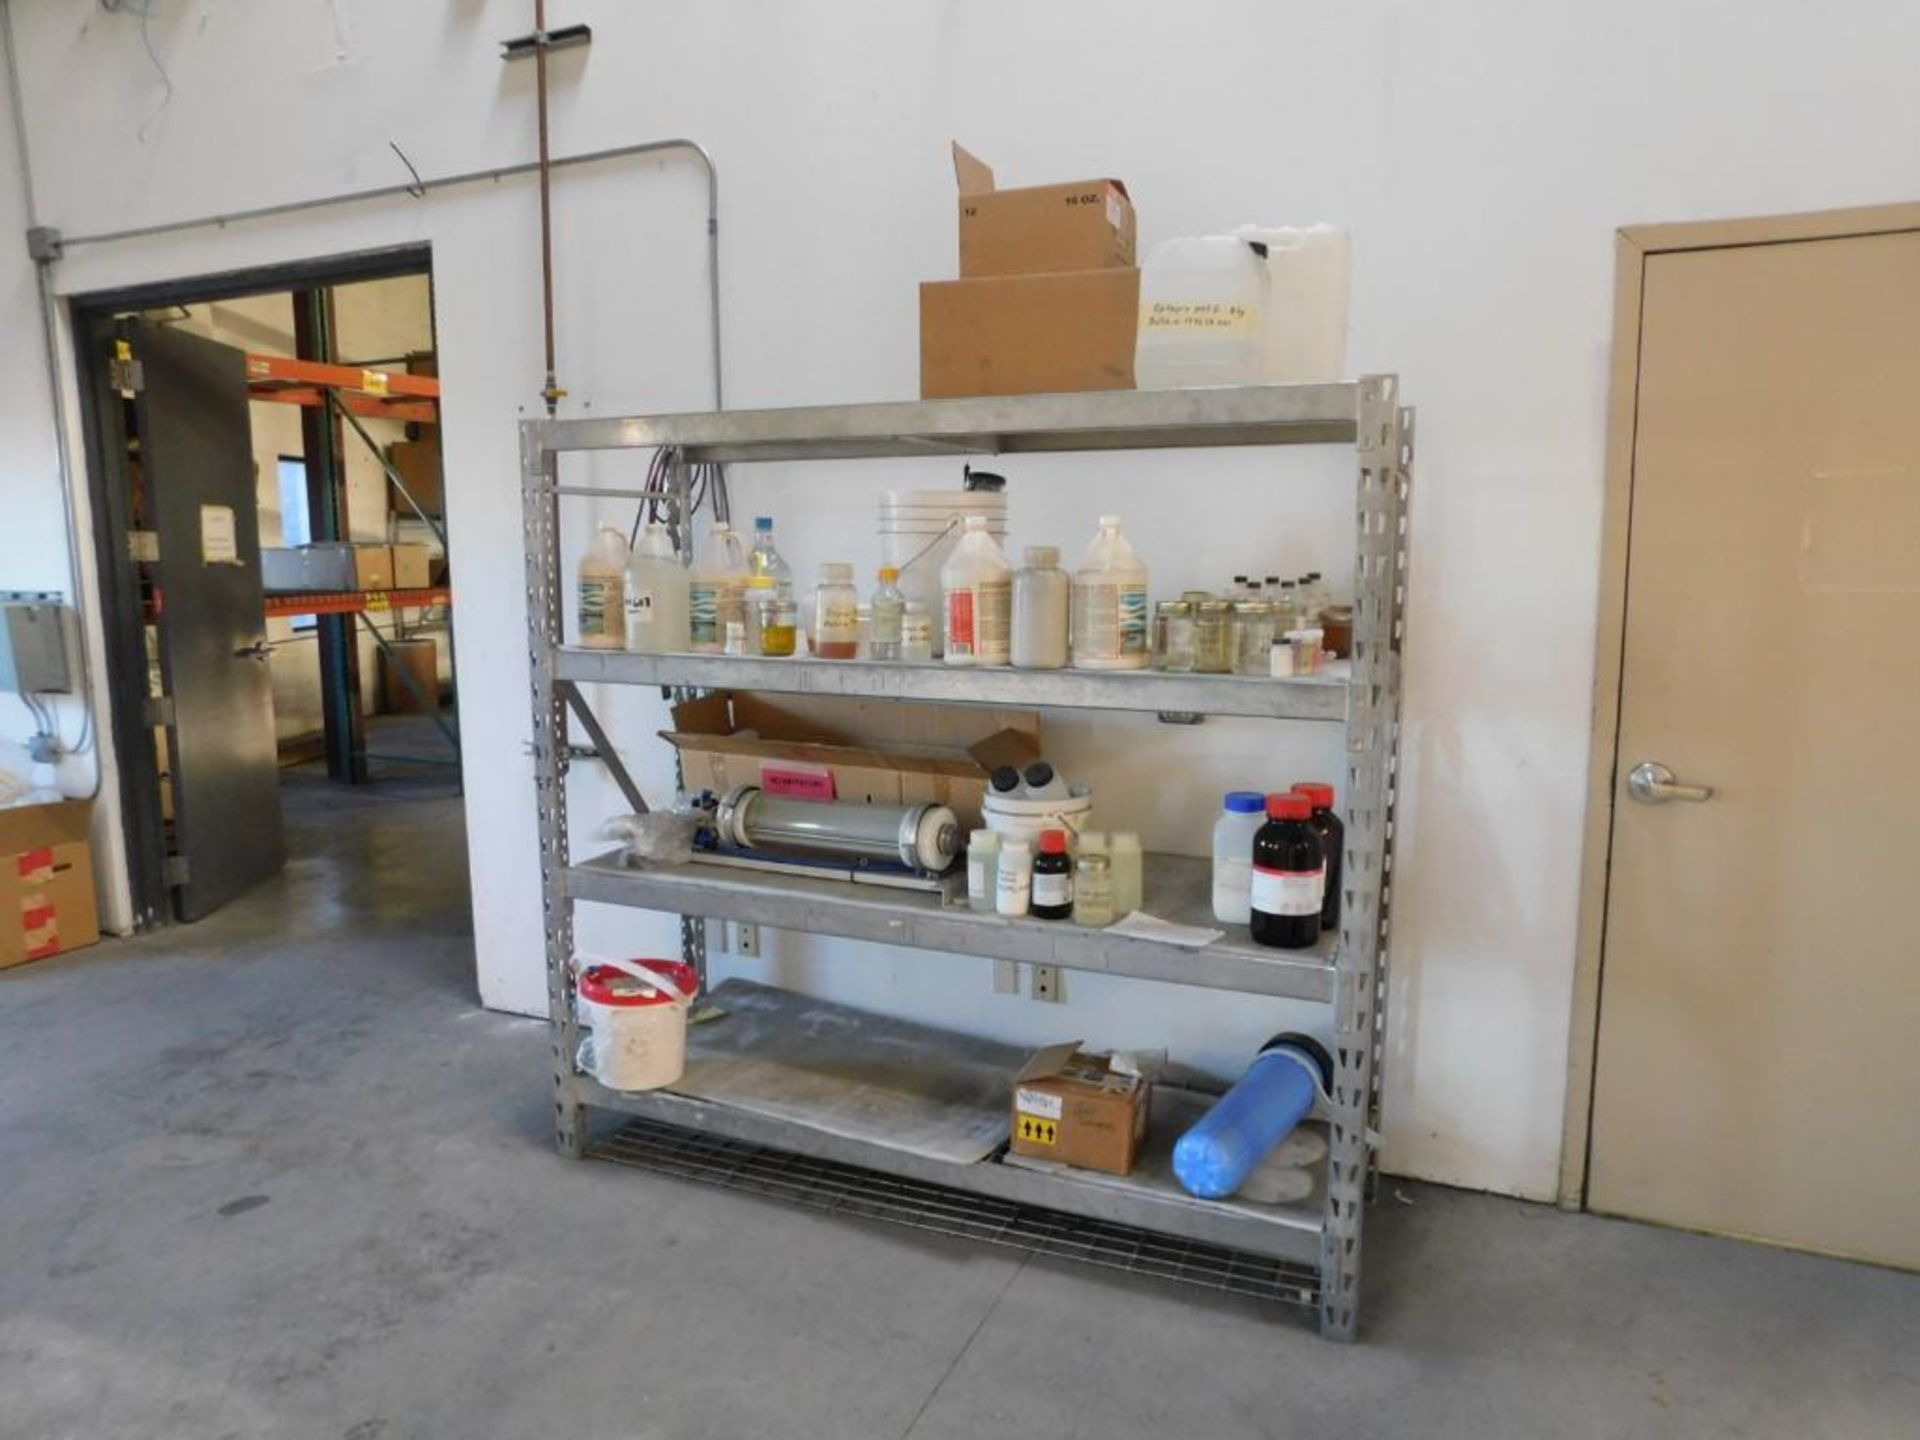 LOT: Contents of Room including (3) Racks, Shelf, Table, Chair, Tool Box - Image 3 of 3